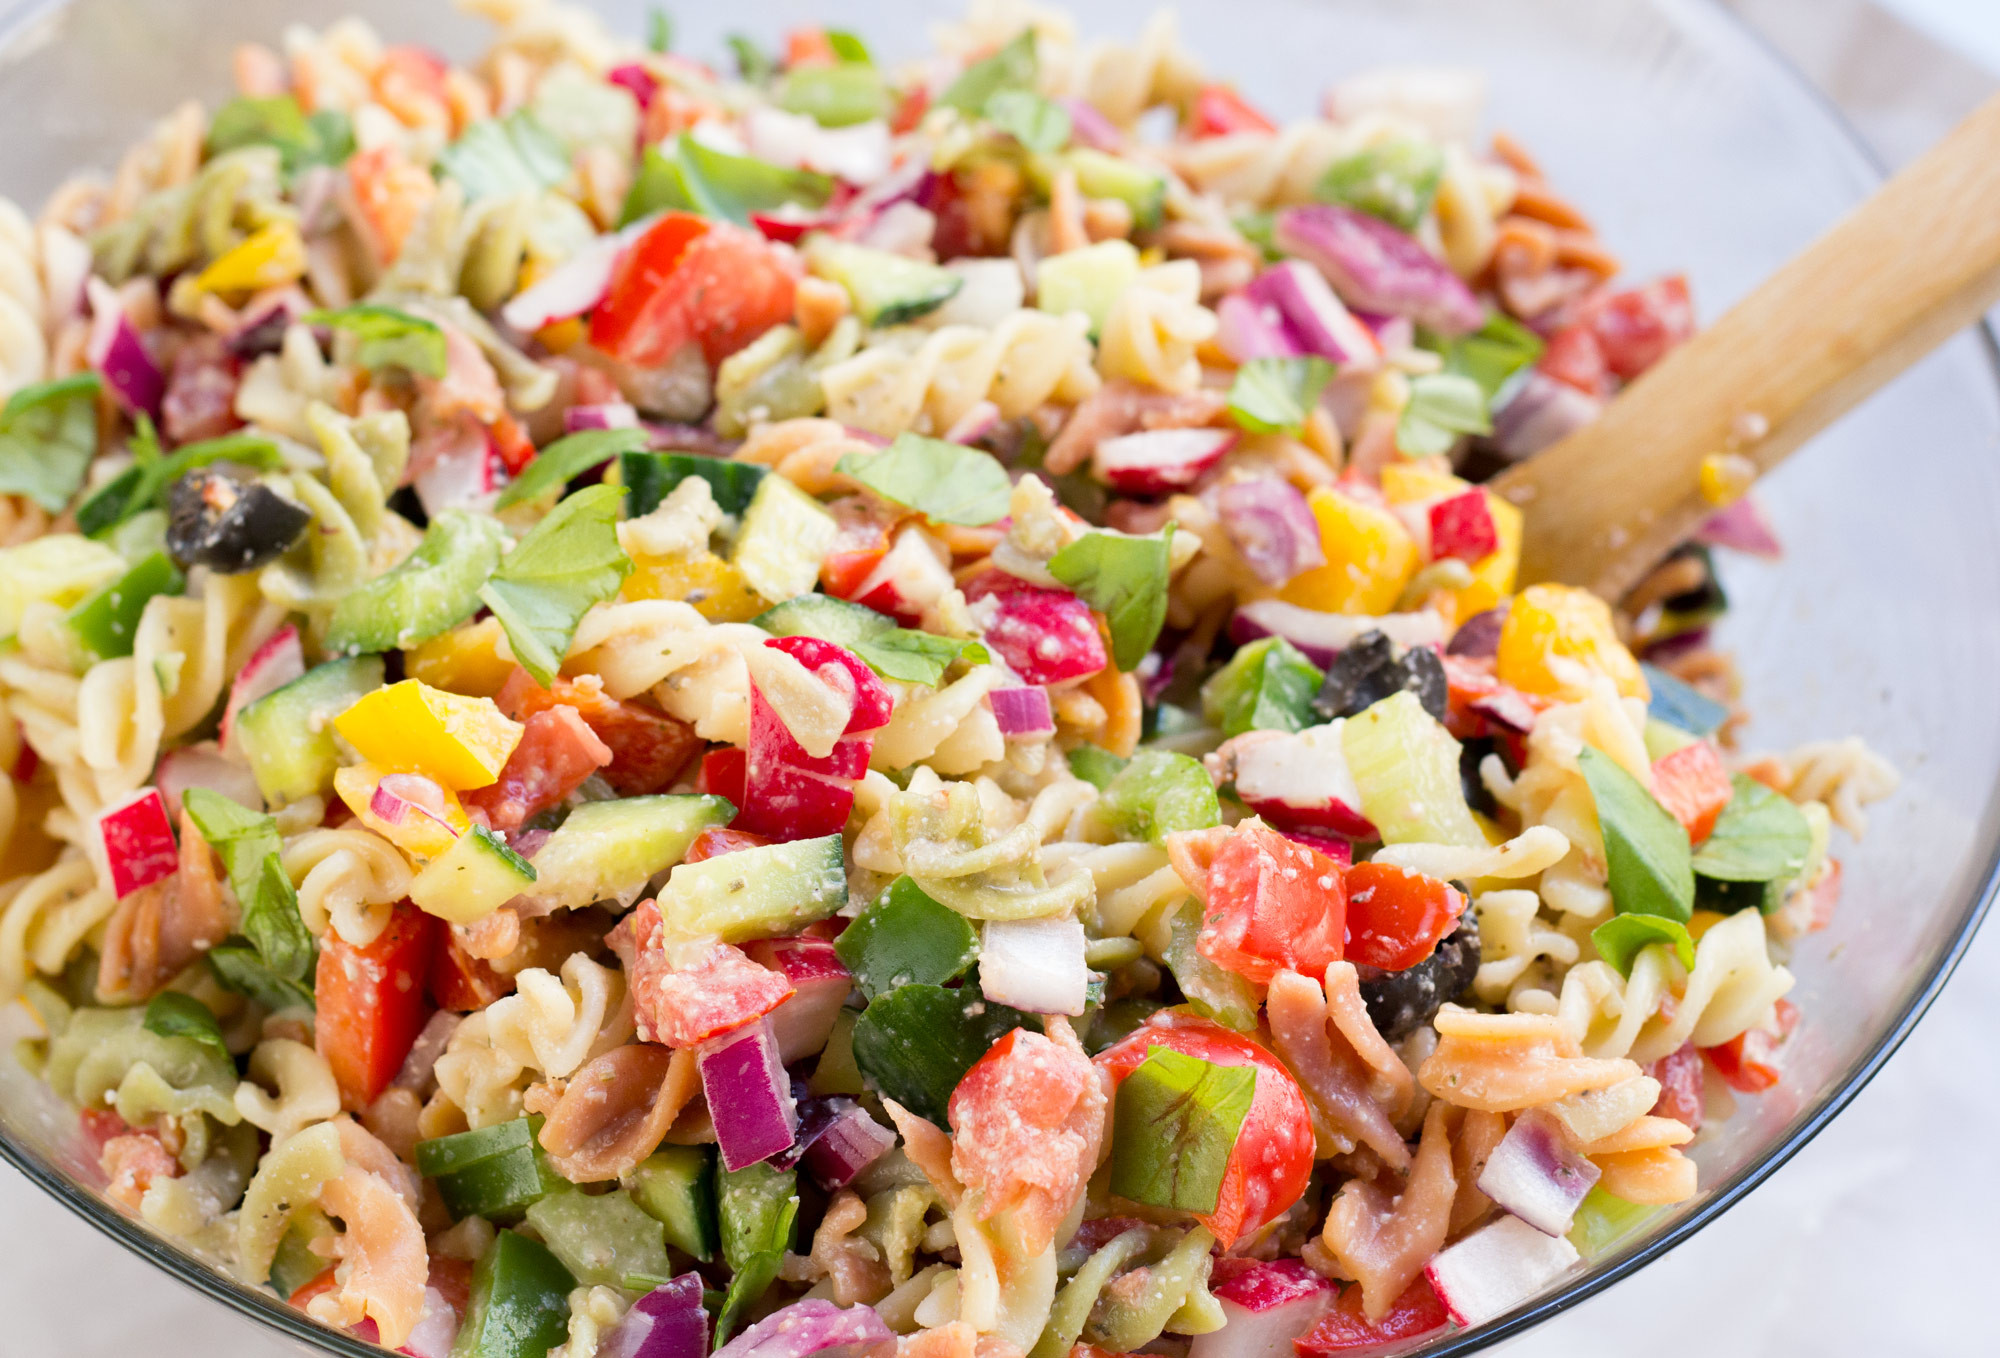 Is Macaroni Salad Healthy 20 Of the Best Ideas for Healthy Rainbow Pasta Salad